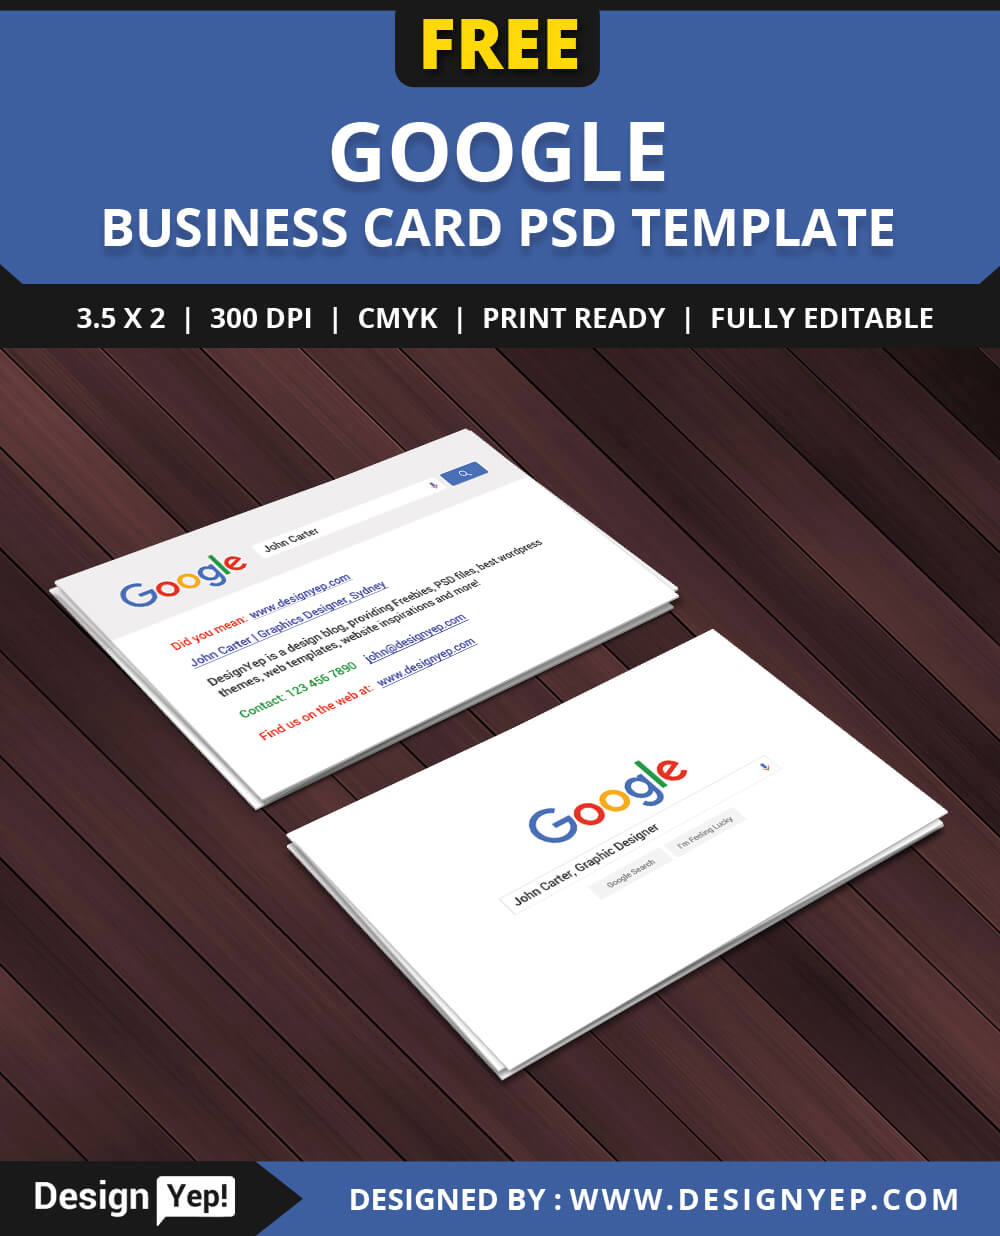 Free Google Interface Business Card Psd Template On Behance With Google Search Business Card Template